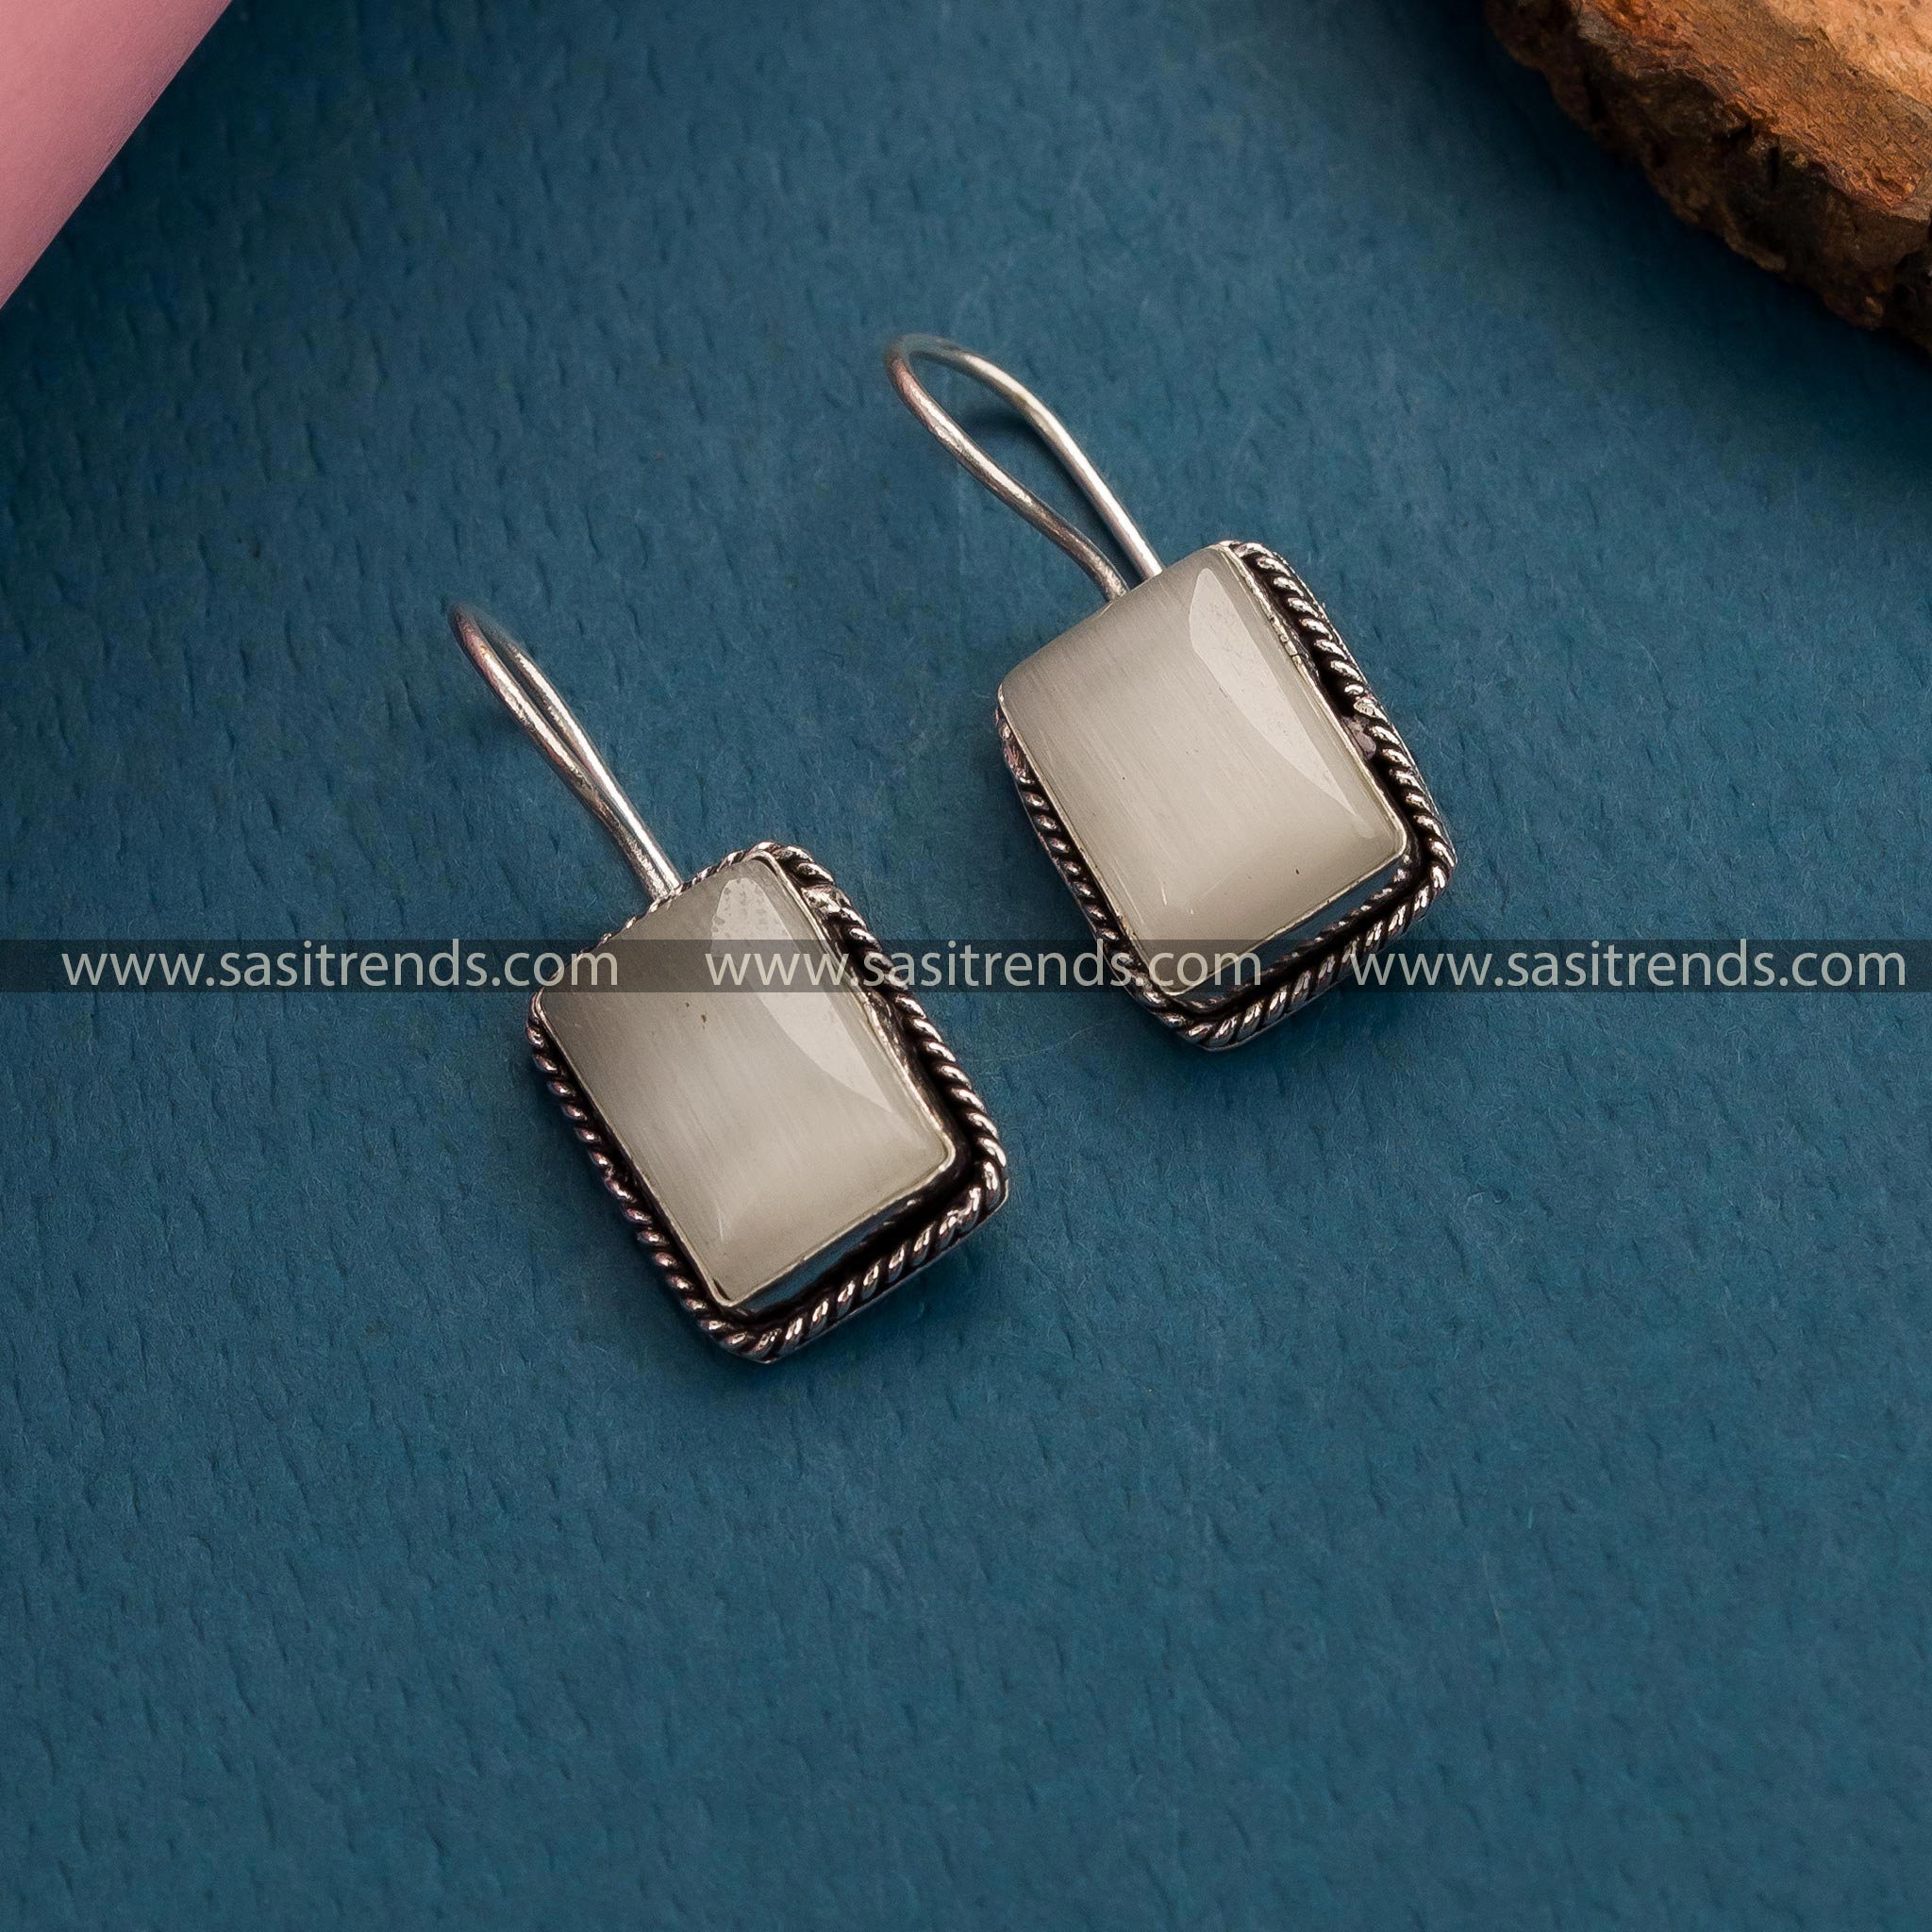 Exquisite Rectangular Monalisa Stone Fish Hook Earrings in Oxidized German  Silver - Latest Collection for Women